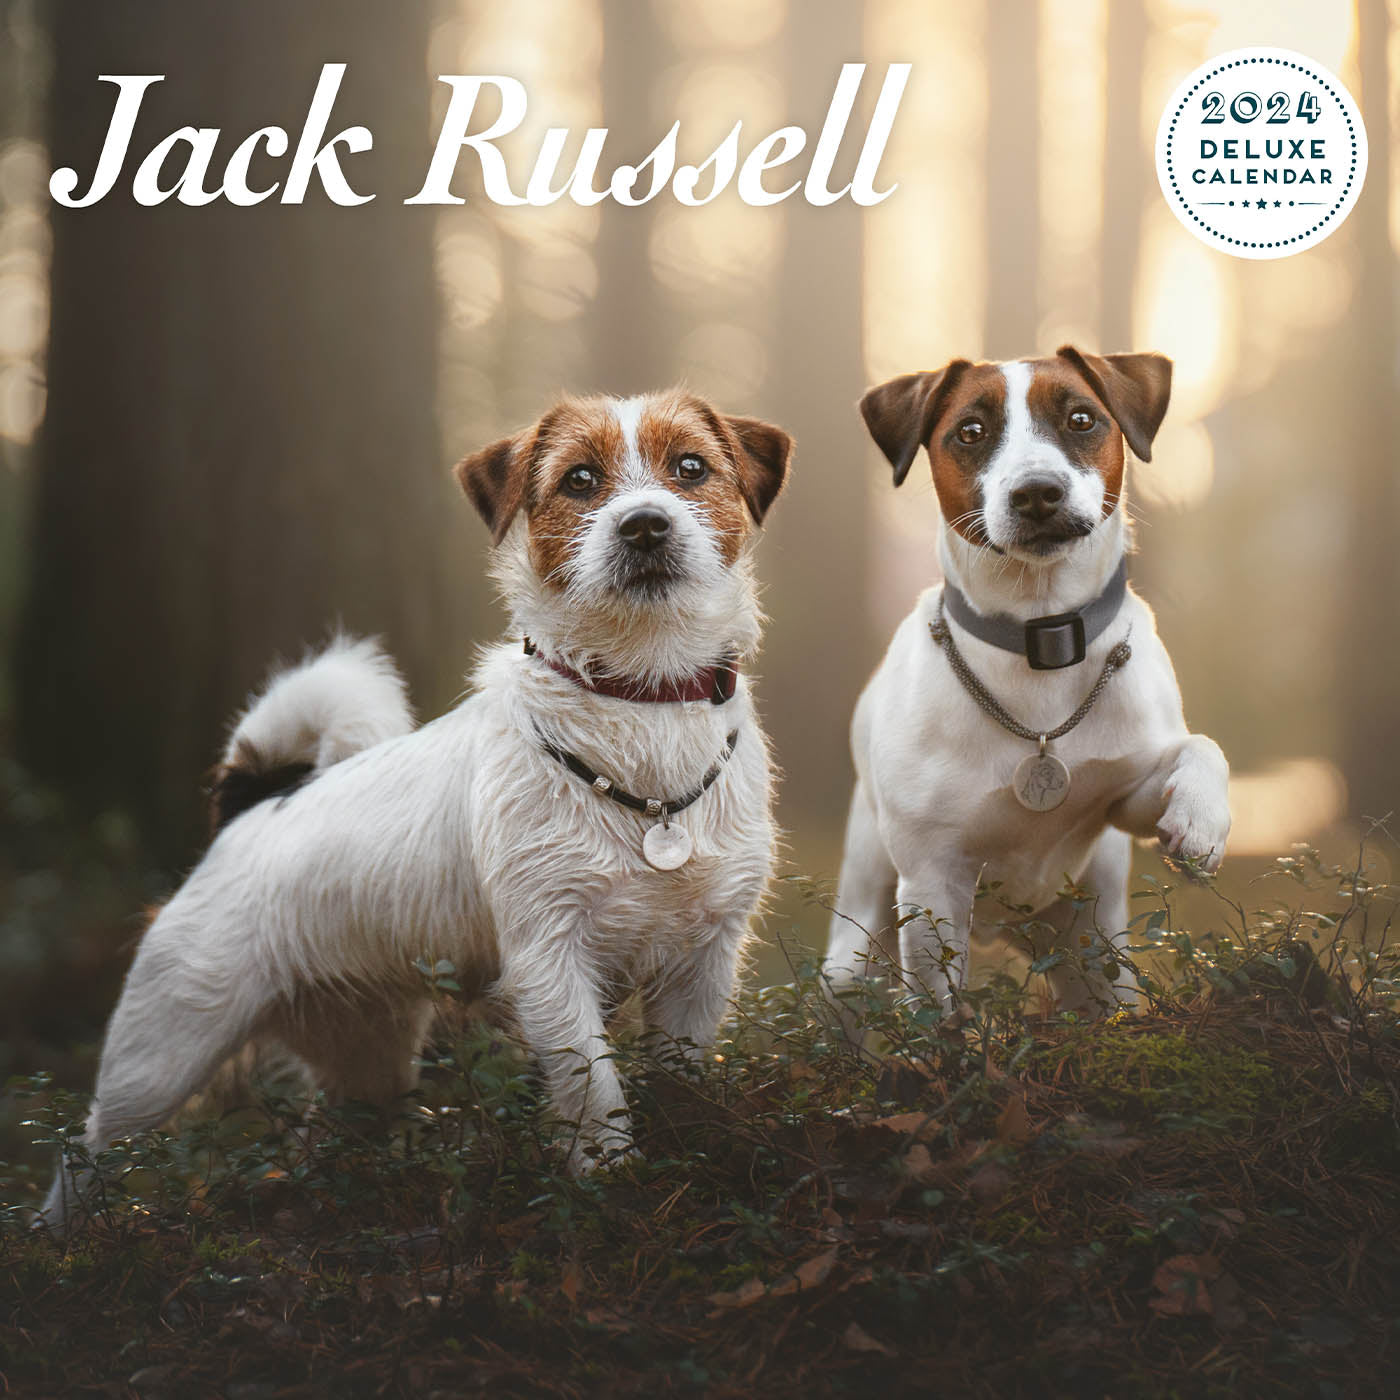 Jack Russell 2024 Deluxe Calendar Gifting Lords & Labradors